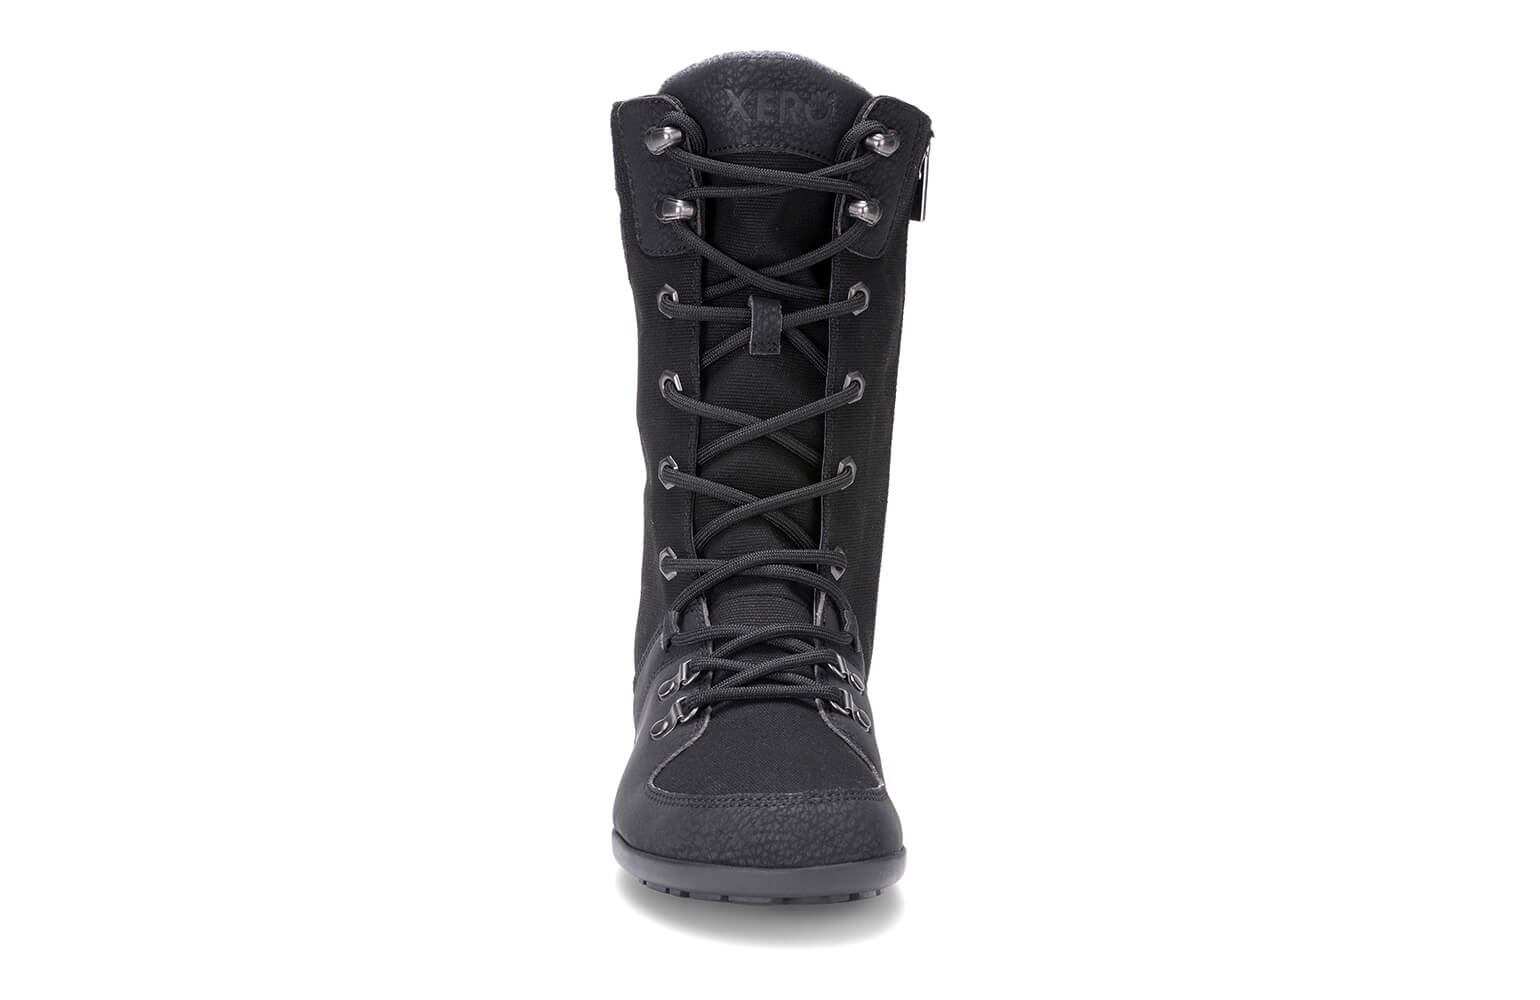 A Cold-Weather Friendly Minimalist Women's Boot - Mika by Xero Shoes